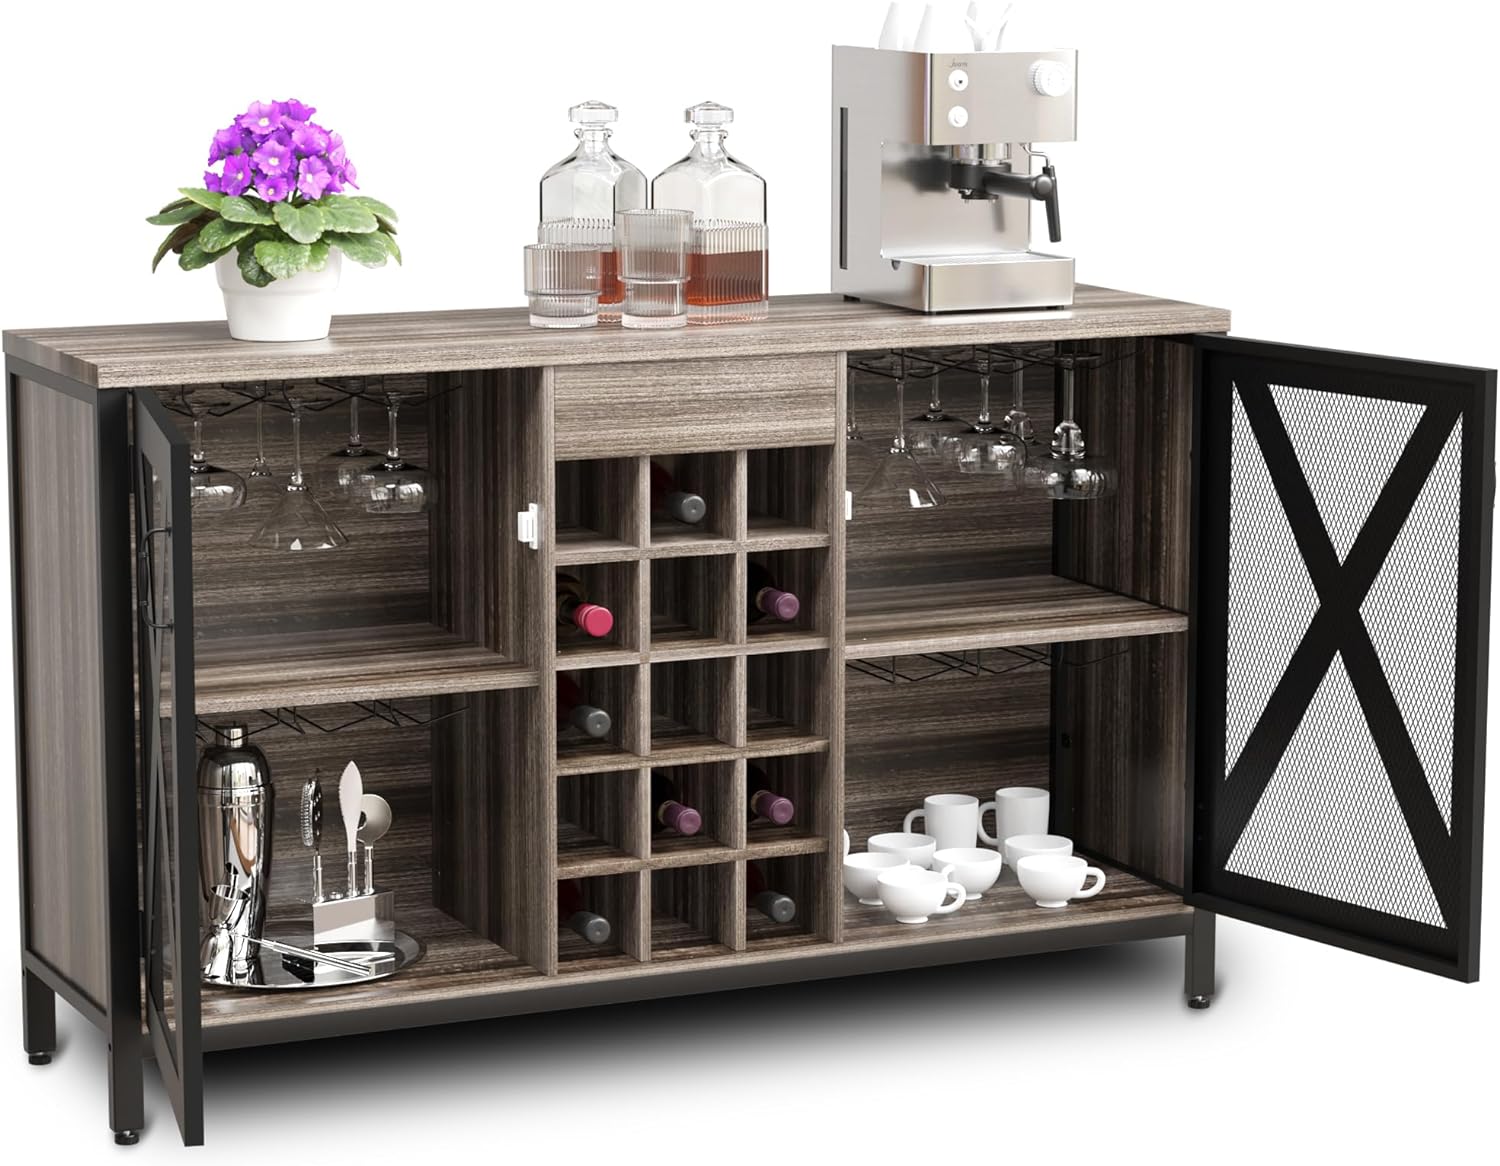 GentProd Industrial Bar Cabinet, Liquor or Coffee Bar Cabinet with Farmhouse Metal Doors, Bar Cabinet with Storage, Wine Glass Holders and Shelves | Tools Included | Light Brown Wood Wine Bar Cabinet